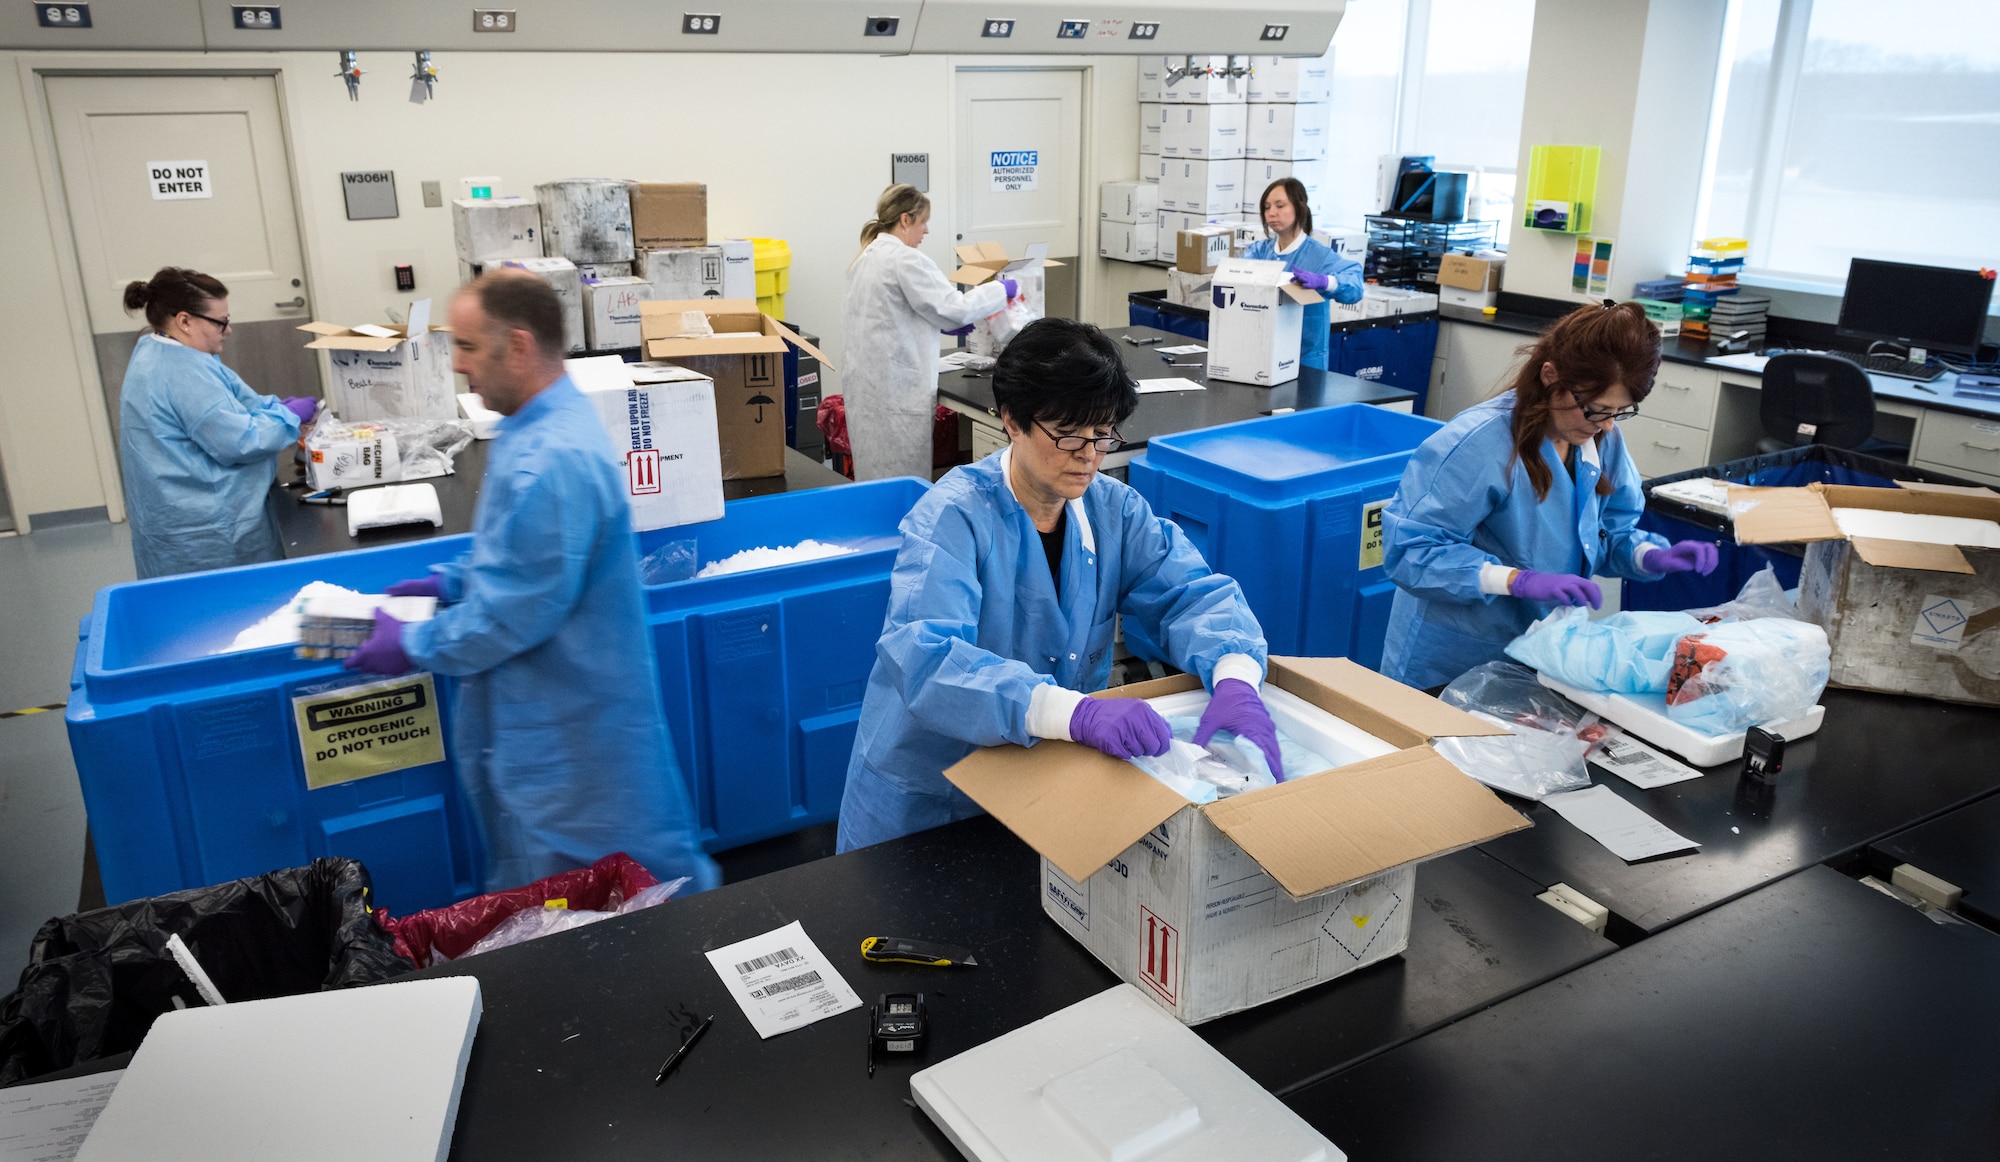 Laboratory technicians unpack and log in blood serum, fecal, urine or respiratory samples which arrive from U.S. Air Force hospitals and clinics around the world, as well as some other Department of Defense facilities Jan. 30, 2018. The Epidemiology Laboratory Service, also known as the �Epi Lab,� at the 711th Human Performance Wing�s United States Air Force School of Aerospace Medicine and Public Health at Wright Patterson AFB, Ohio, receives 100-150 boxes a day, six days a week. The lab, which tests between 5,000 and 8,000 samples daily, is a Department of Defense reference laboratory offering clinical diagnostic, public health, and force health screening and testing. (U.S. Air Force photo by J.M. Eddins Jr.)